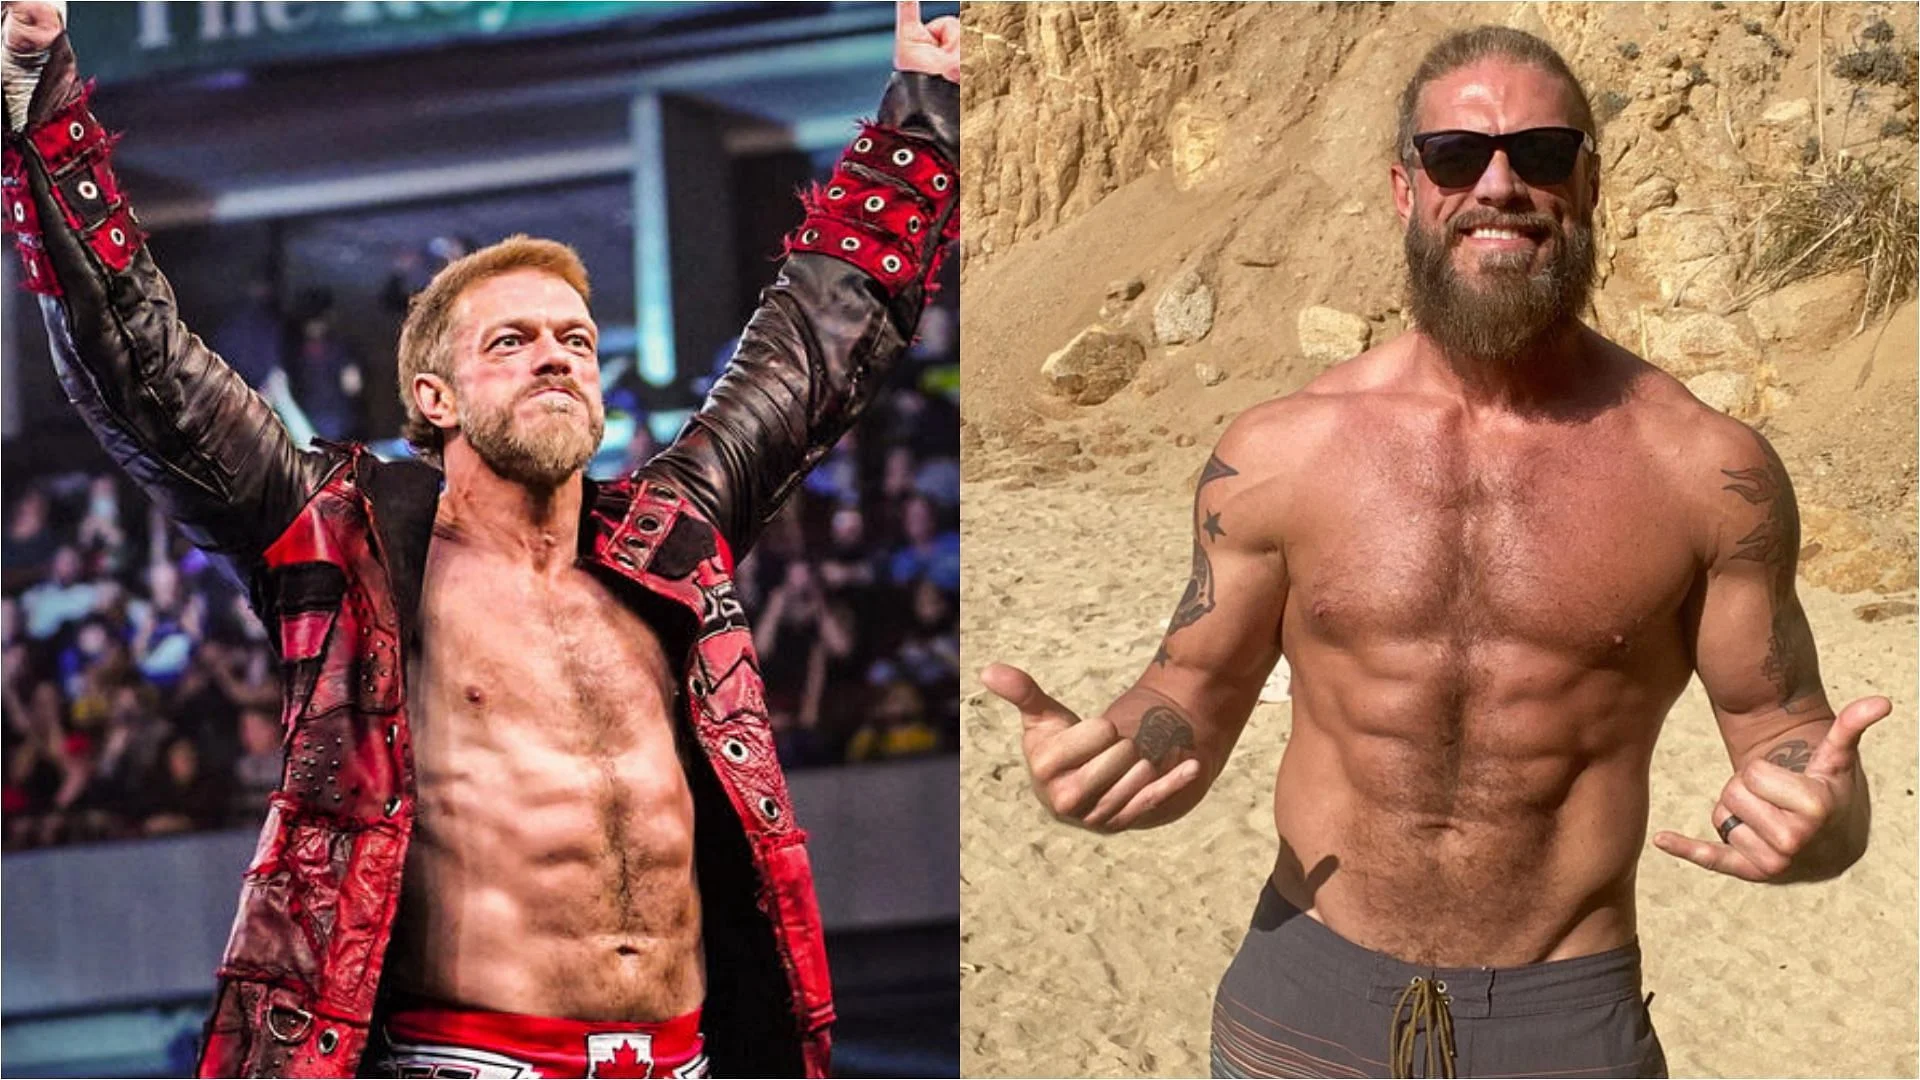 Wrestling Legend Edge Embraces New AEW Challenges, Leaves WWE Legacy Behind